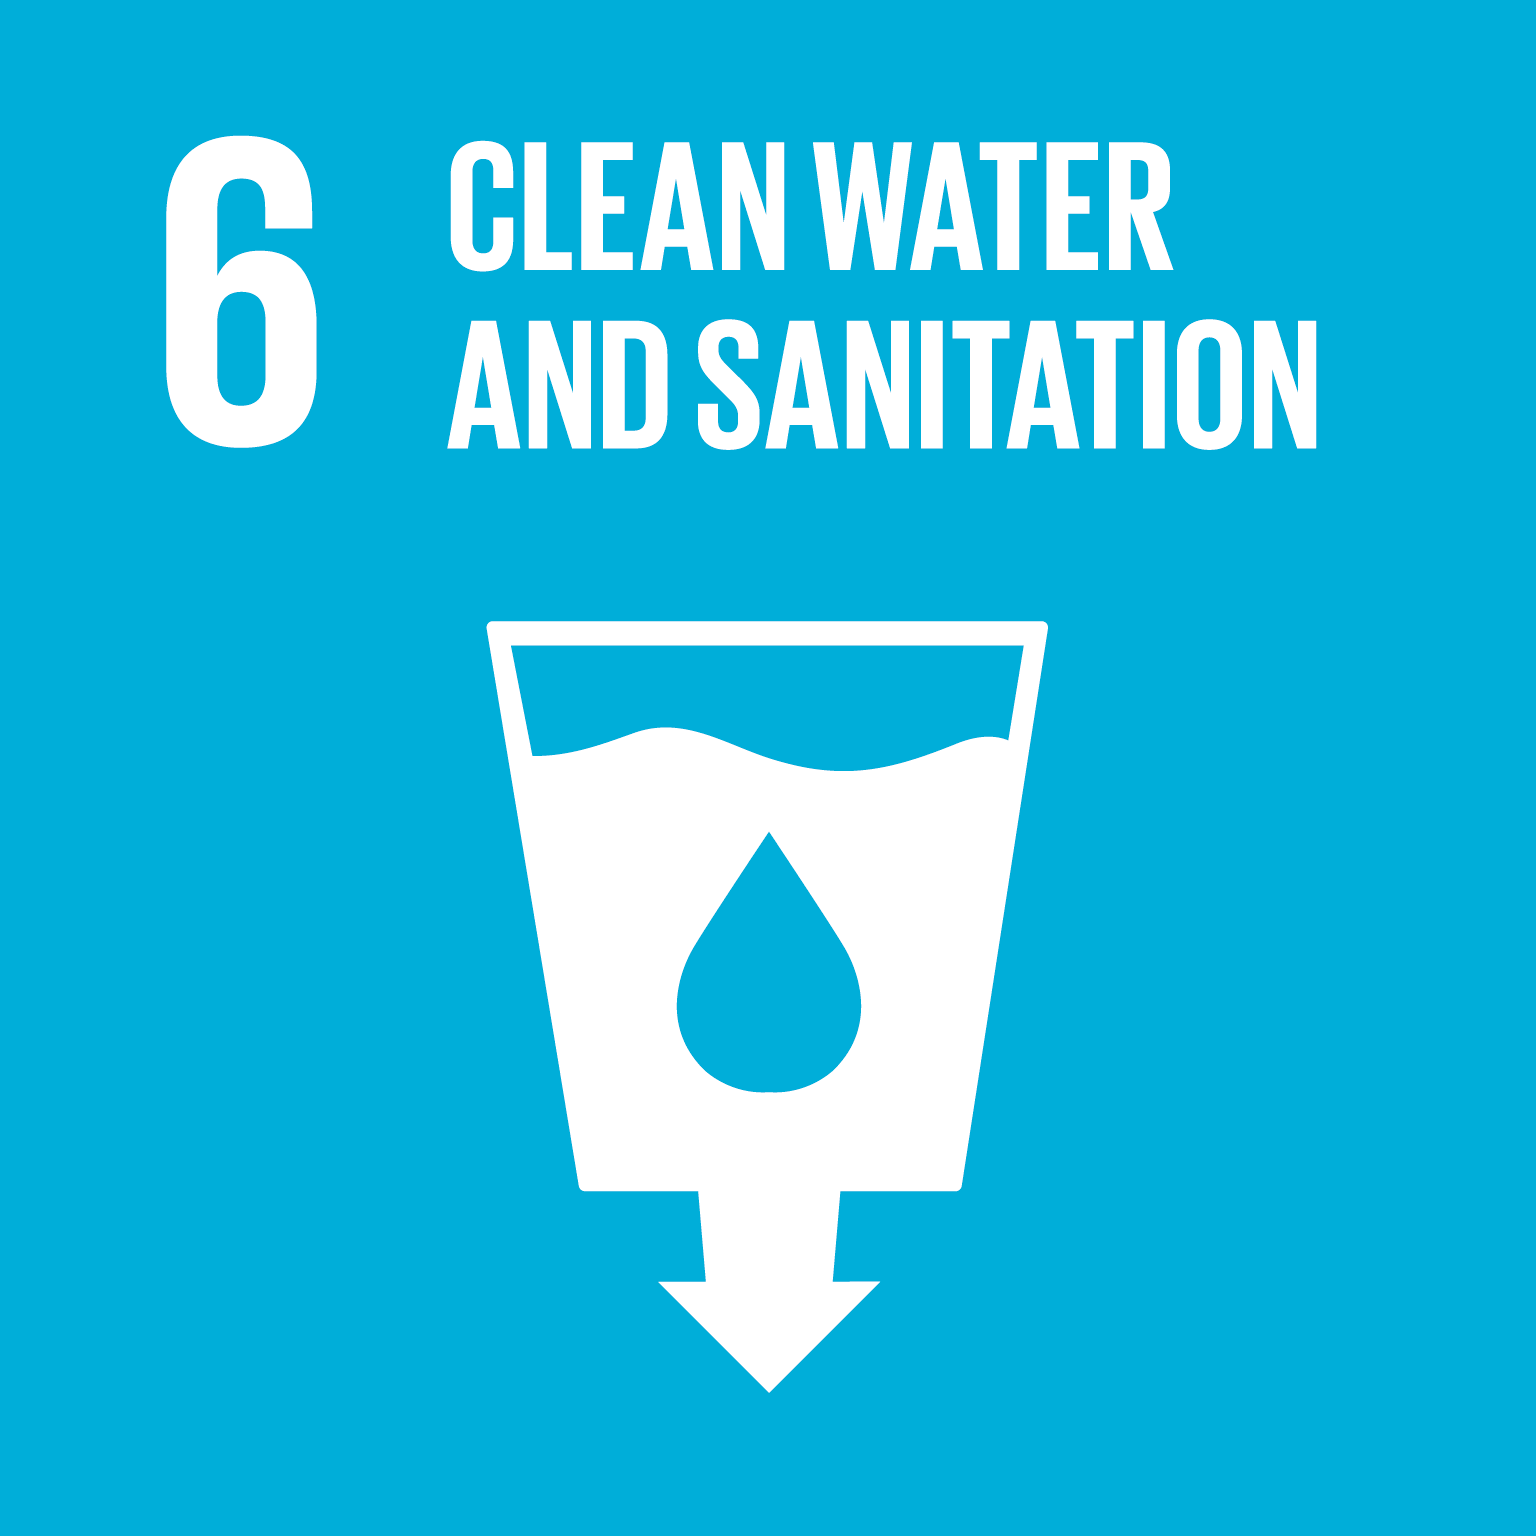 image of clean water and sanitation